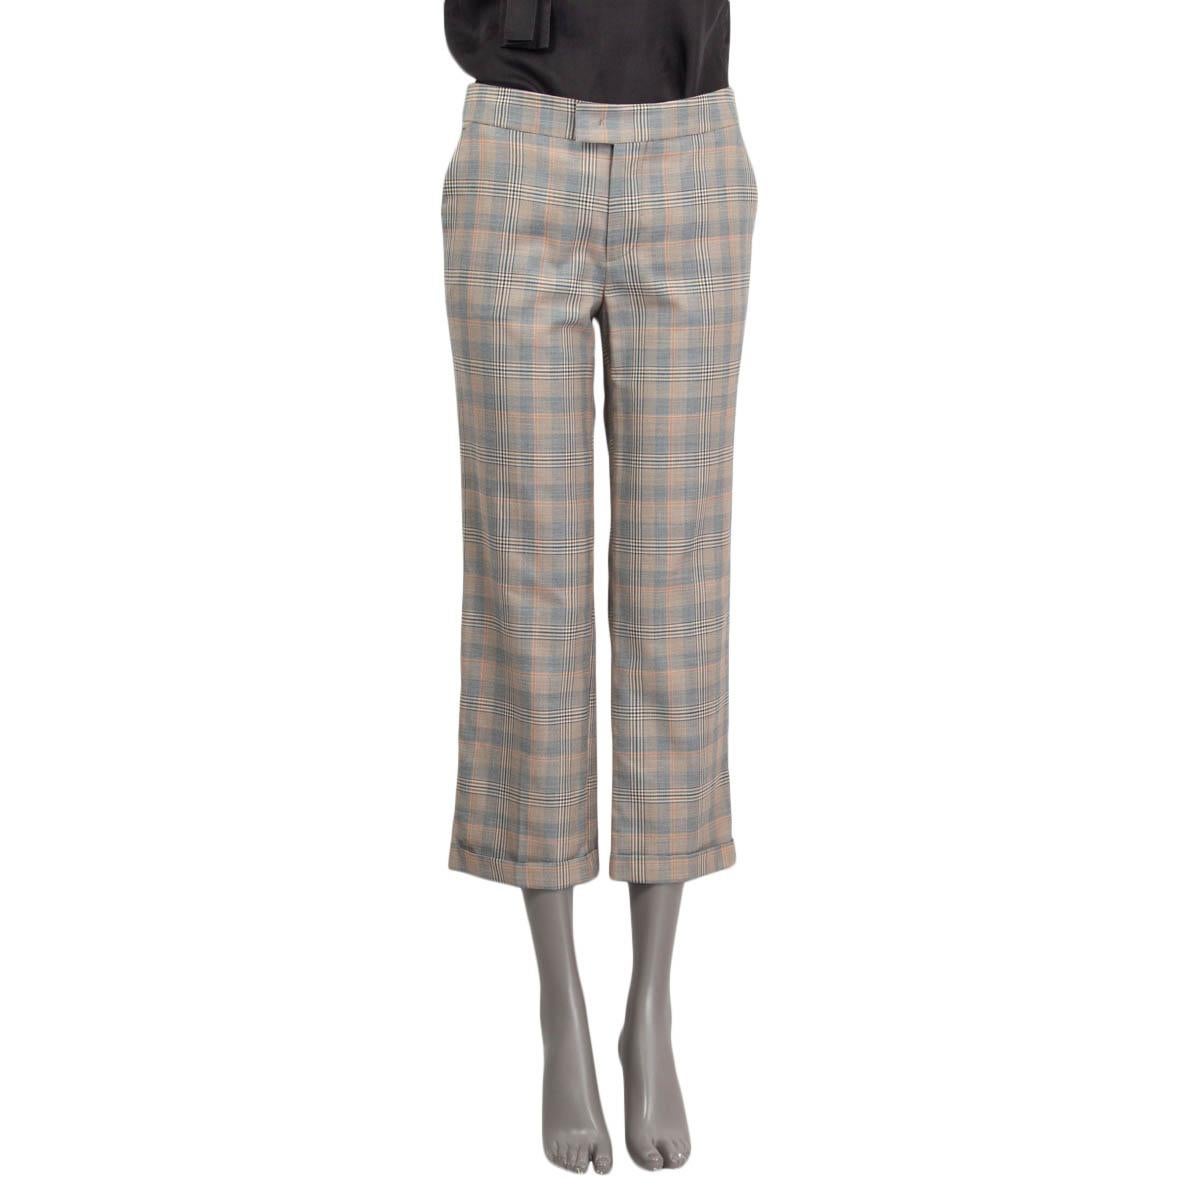 100% authentic Etro mid-calf plaid pants in brown, orange, gray and beige cotton (50%), laine wool (42%) and silk (8%). Comes with two slit pockets on the front and two slit pockets on the back. Opens with a concealed button, hook and zipper on the